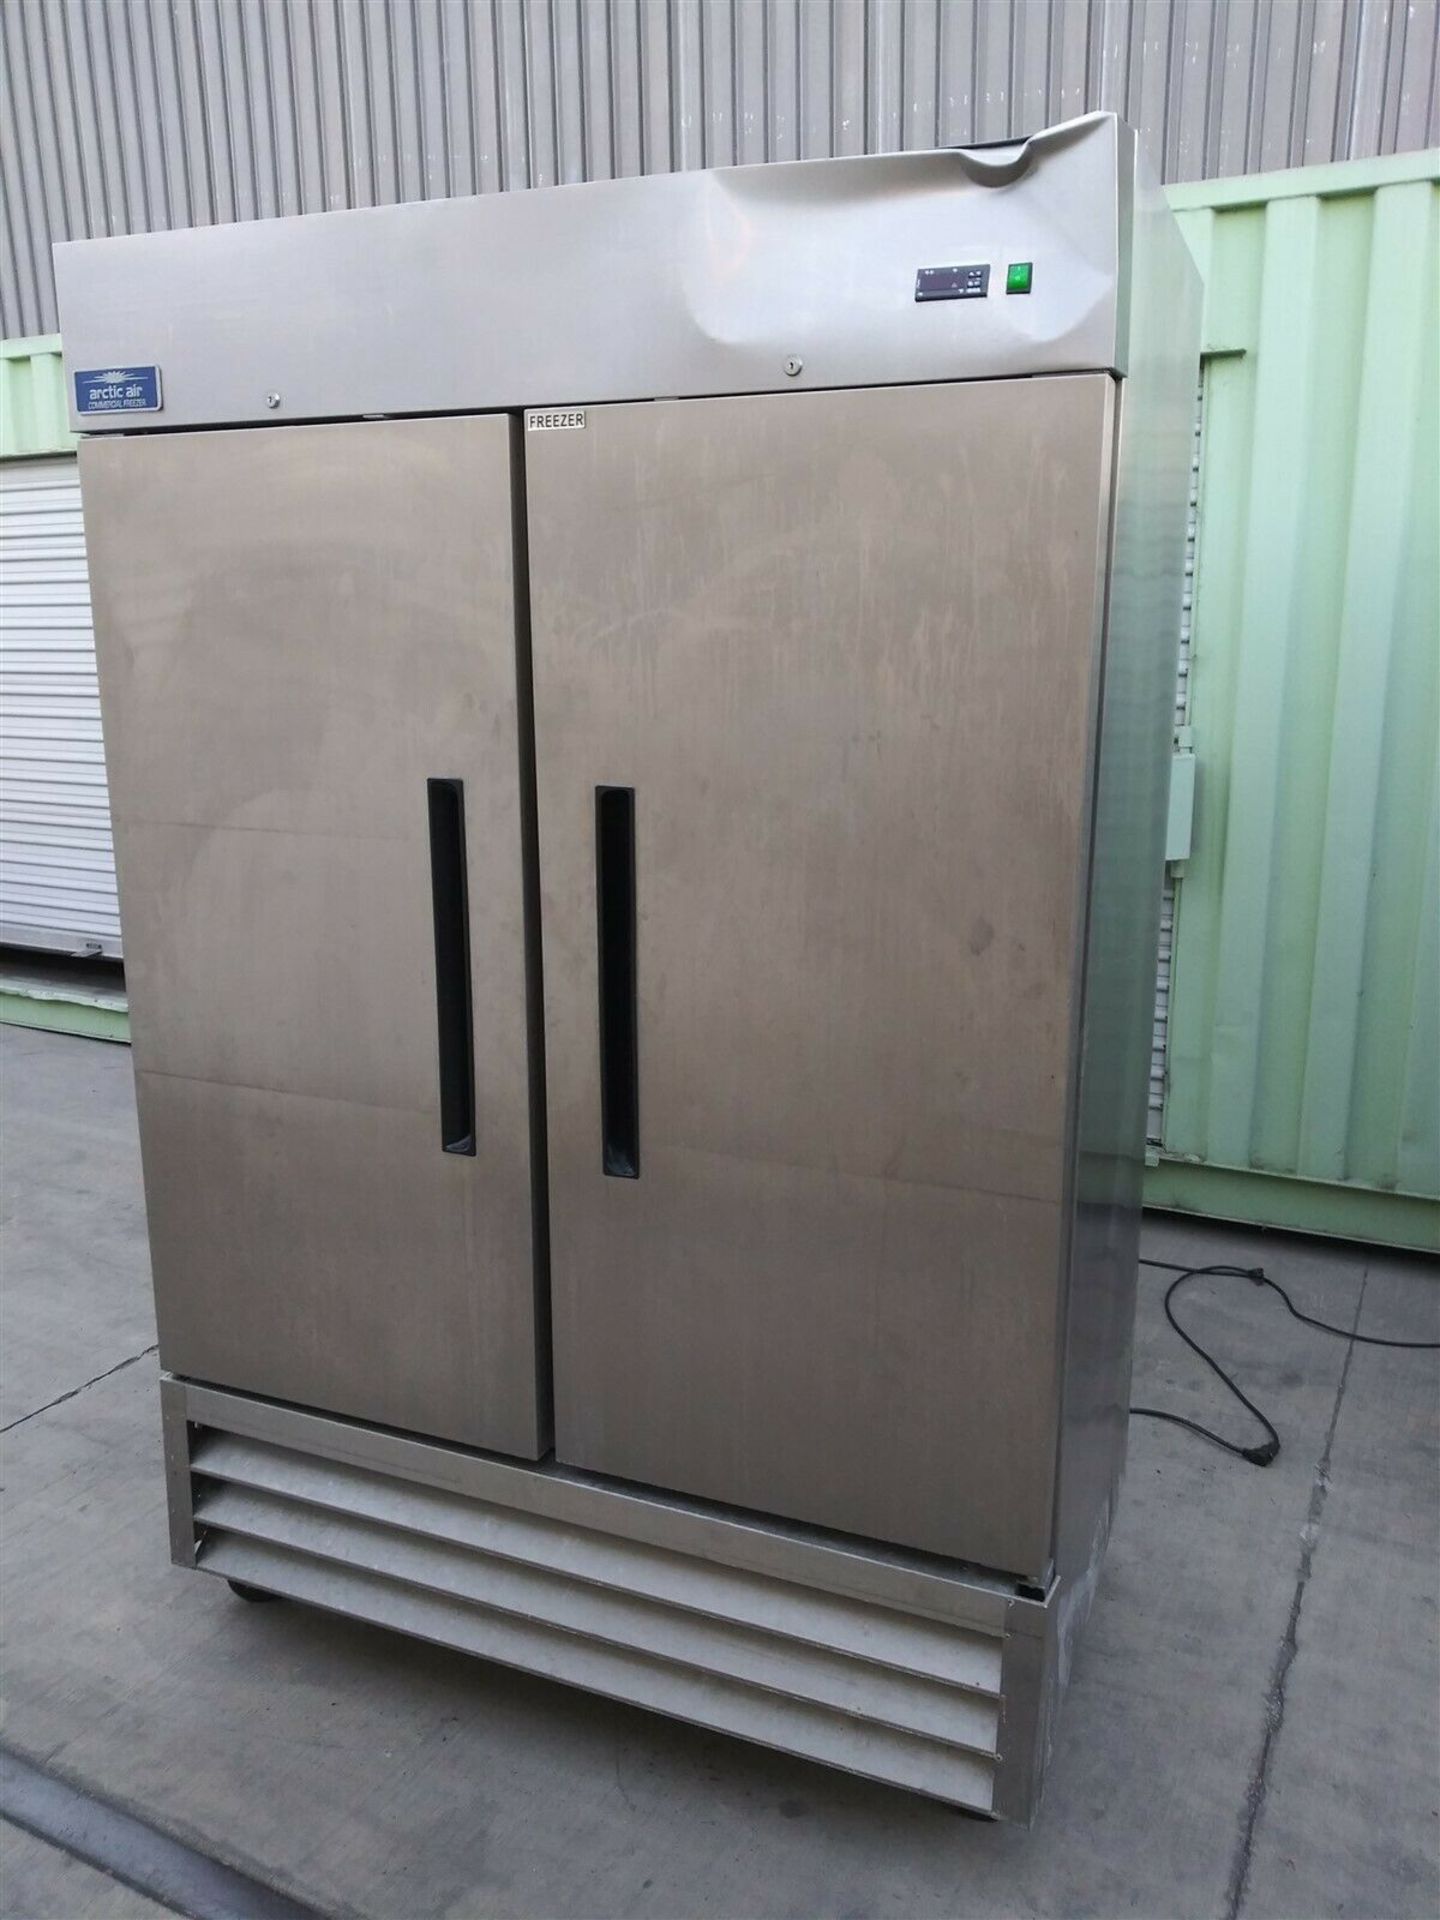 ARCTIC AIR STAINLESS STEEL COMMERCIAL FREEZER